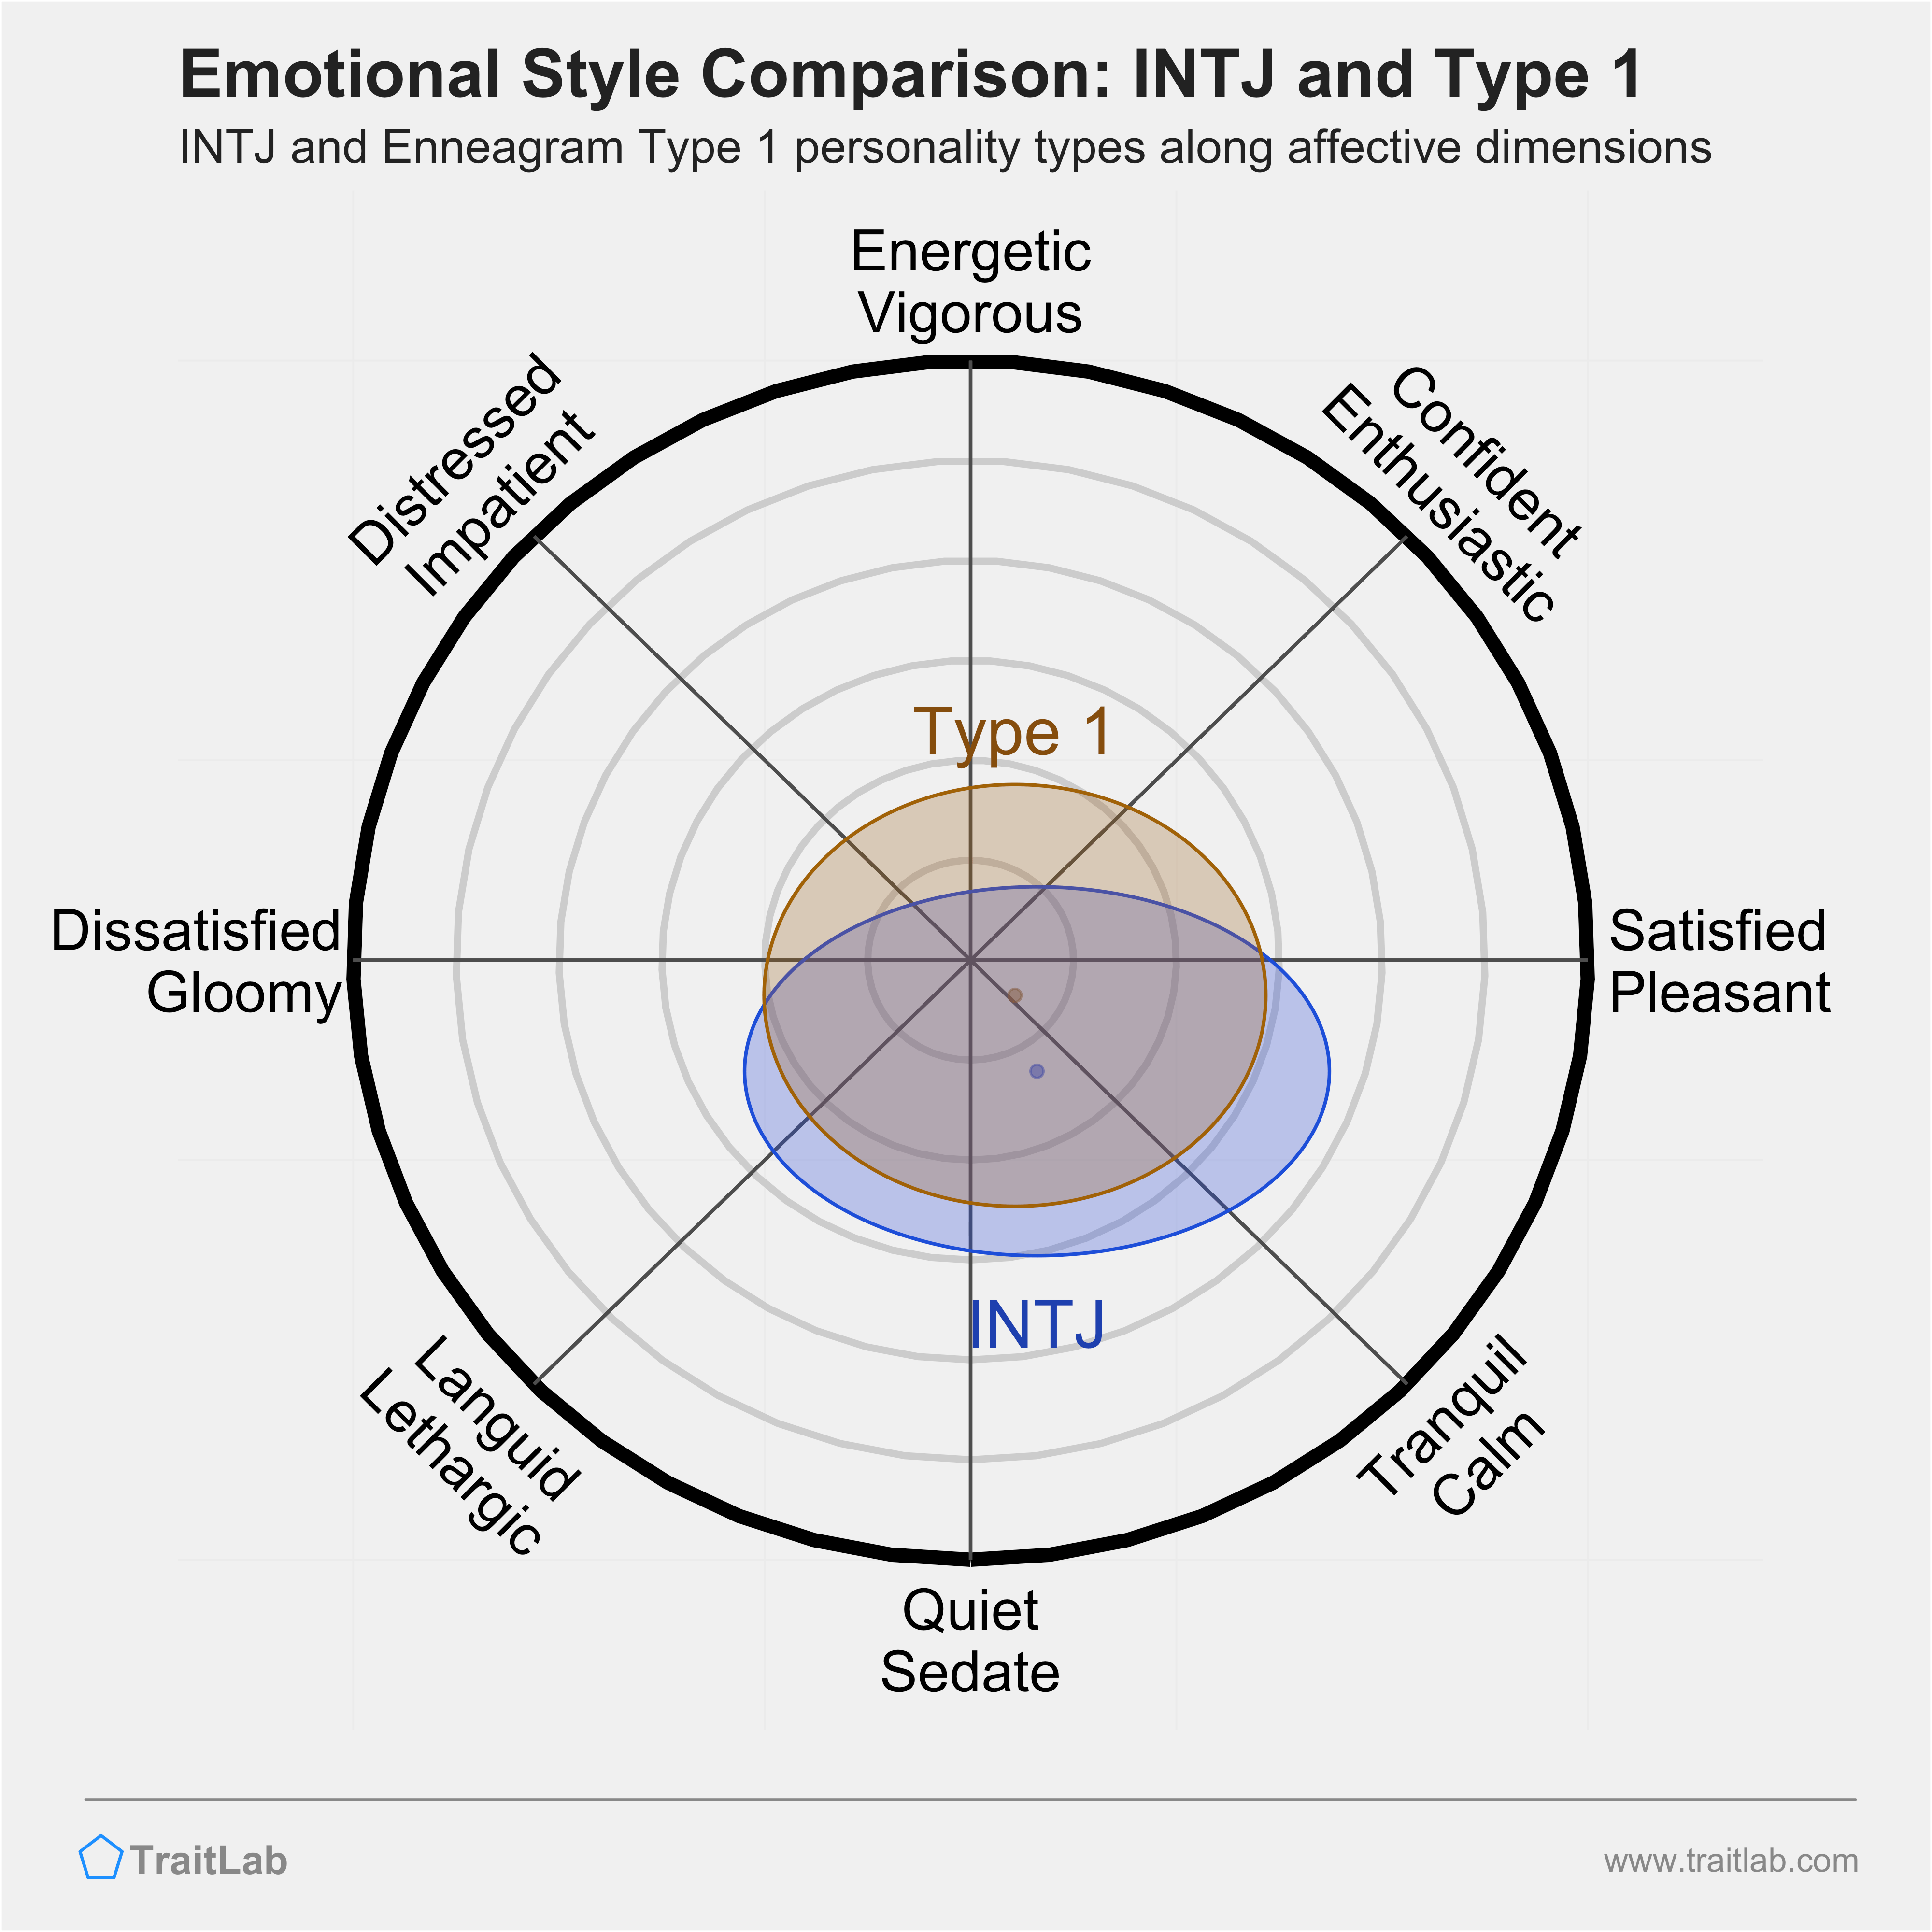 INTJ and Type 1 comparison across emotional (affective) dimensions